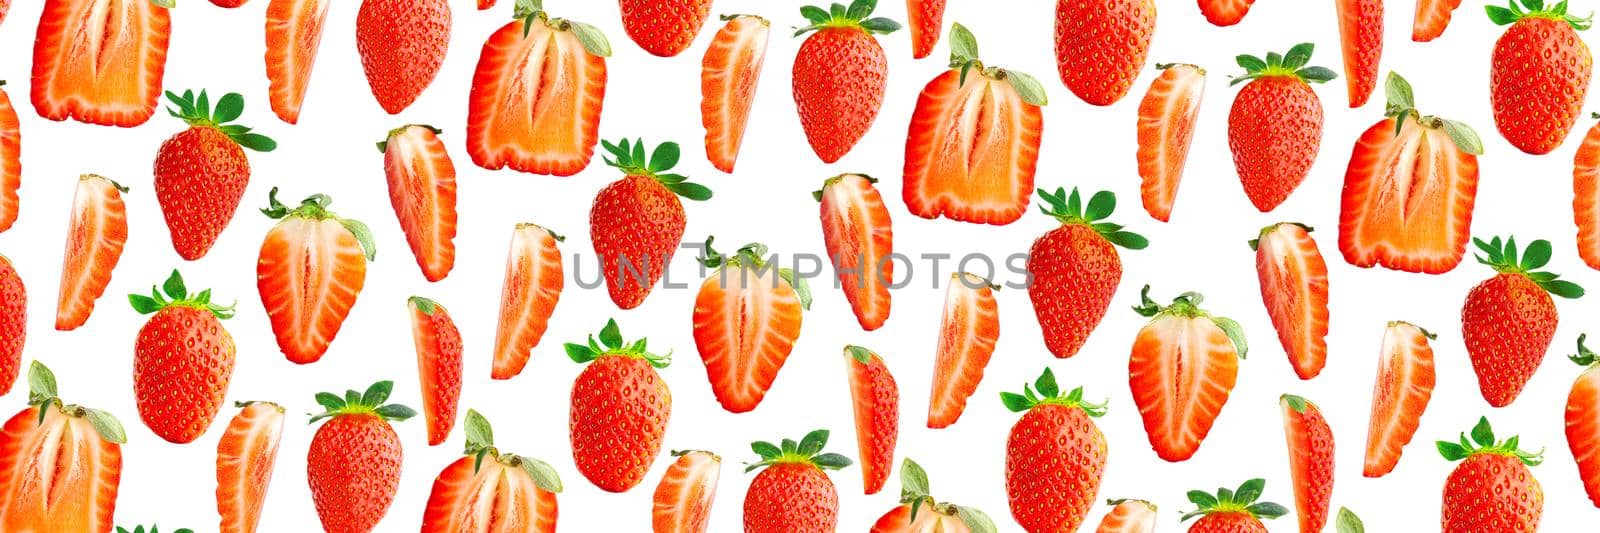 Colorful background of fresh ripe strawberries on white backdrop. Top view, flat-lay banner for packing design